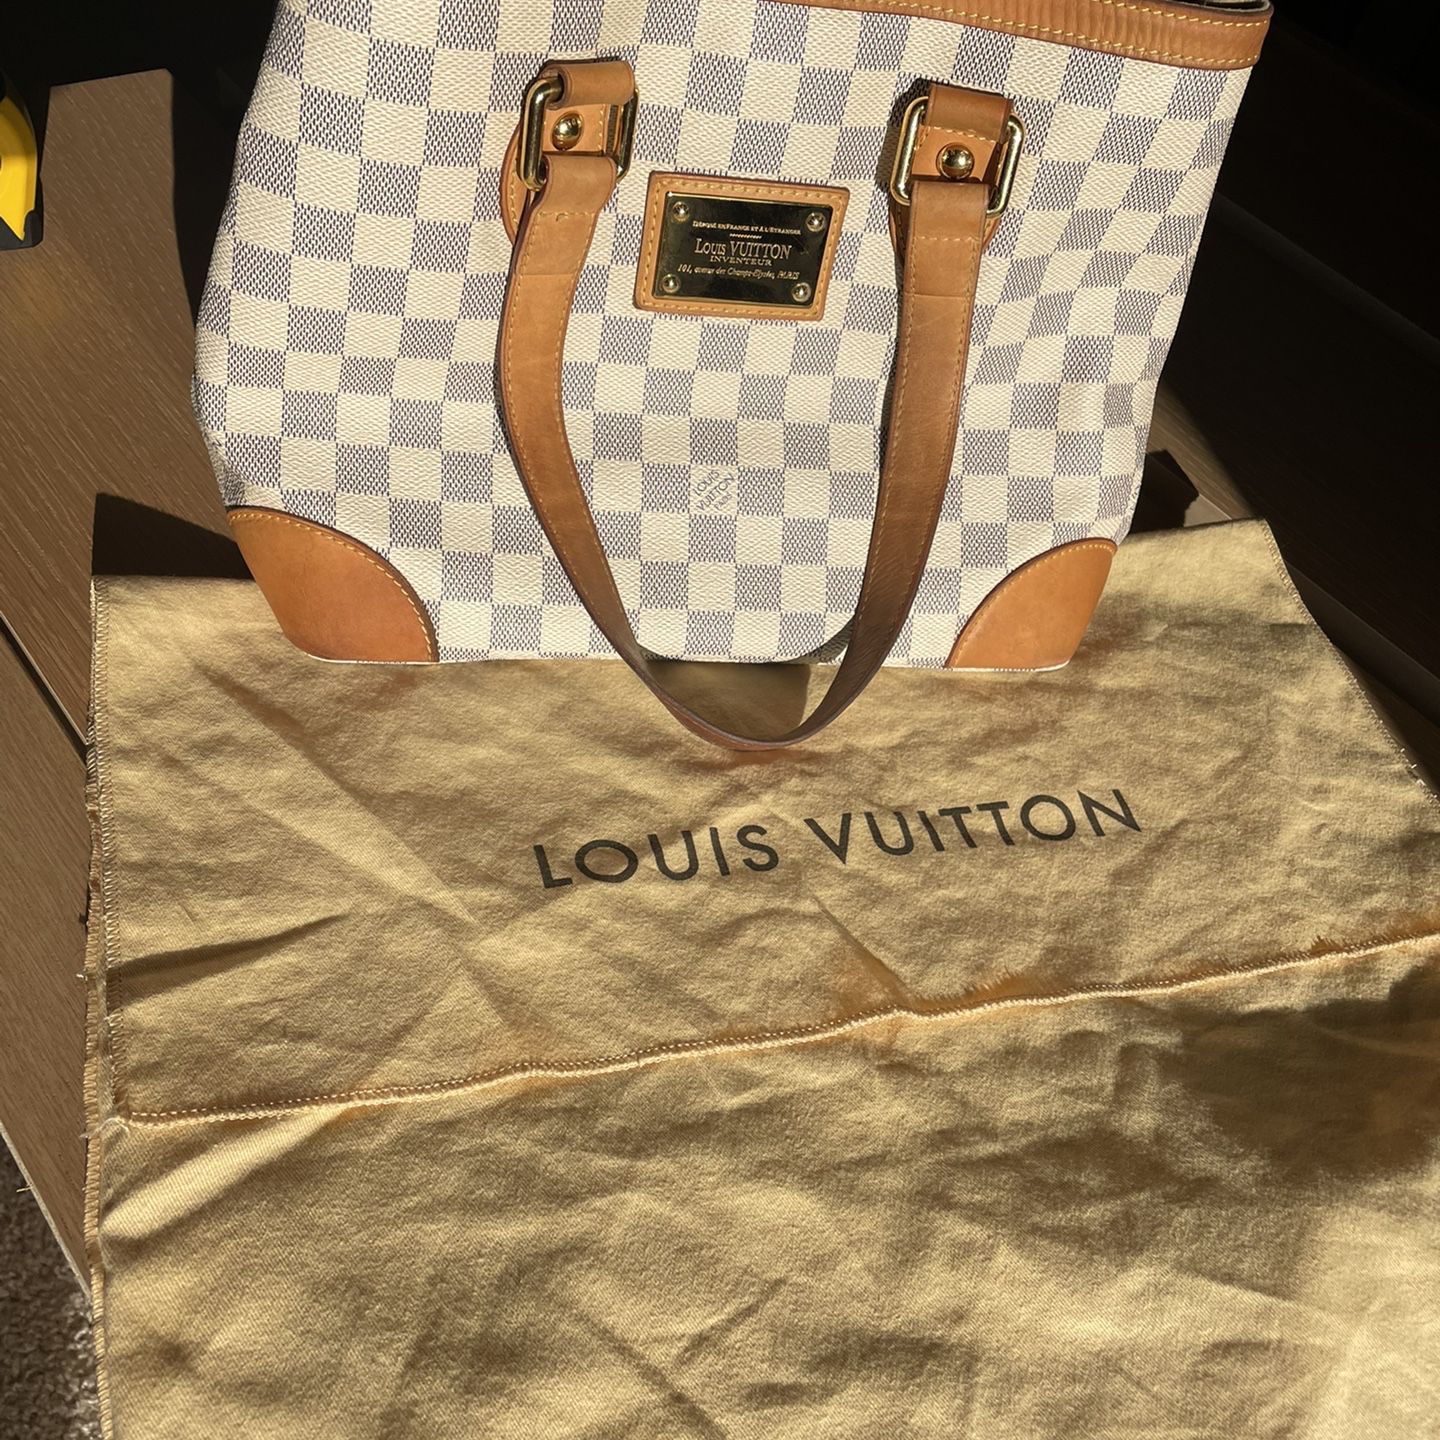 Louis Vuitton Backpack for sale for Sale in Chula Vista, CA - OfferUp